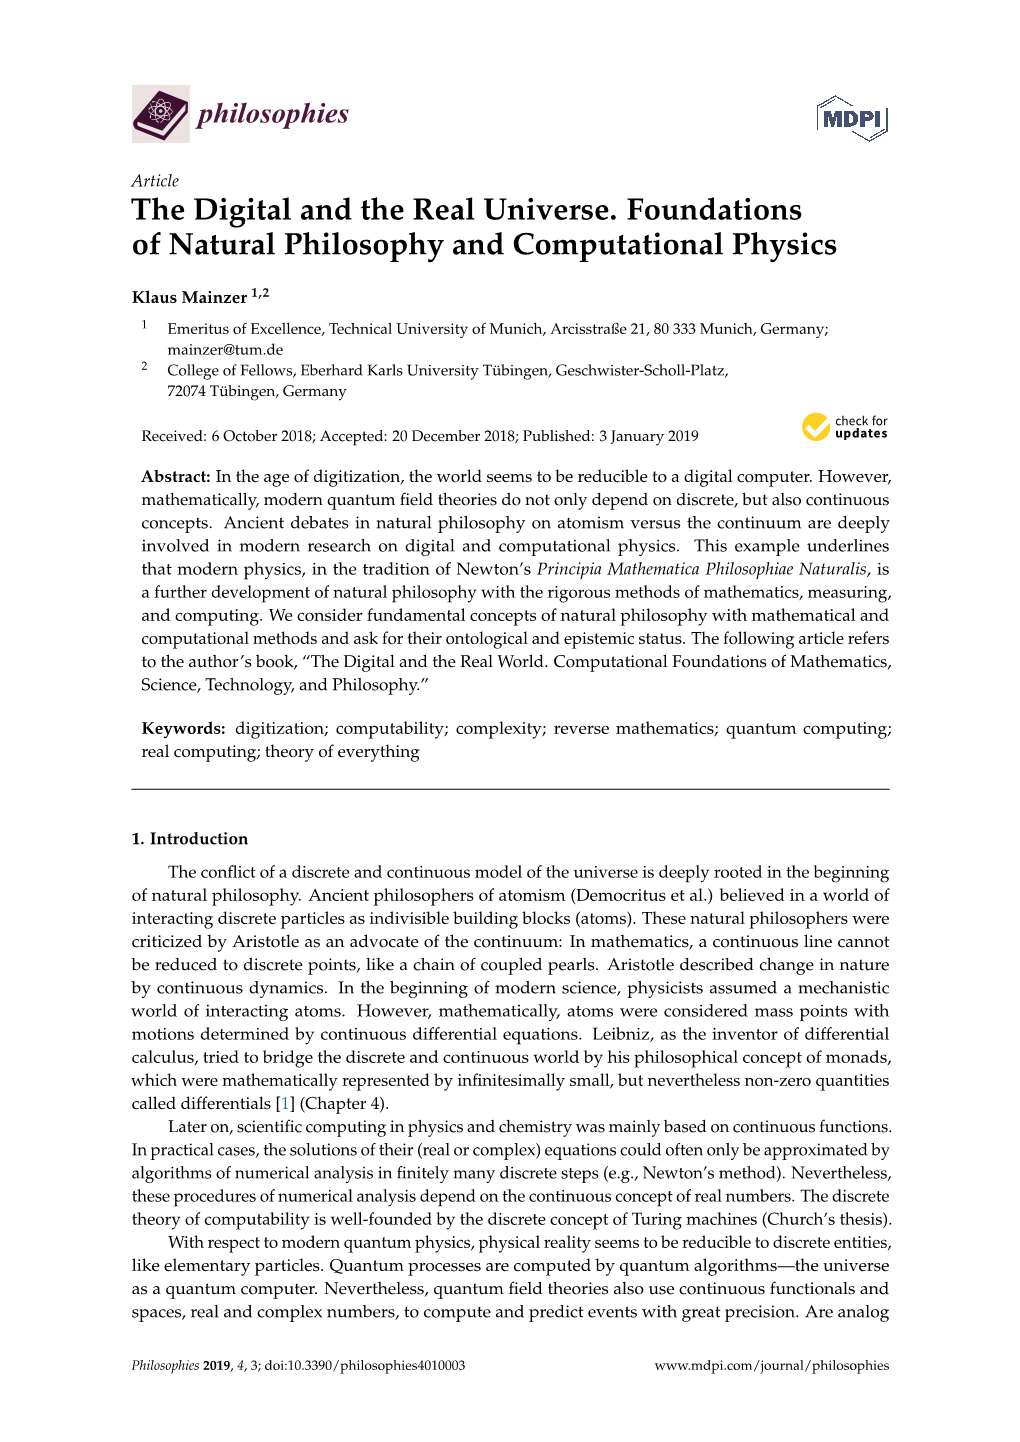 The Digital and the Real Universe. Foundations of Natural Philosophy and Computational Physics